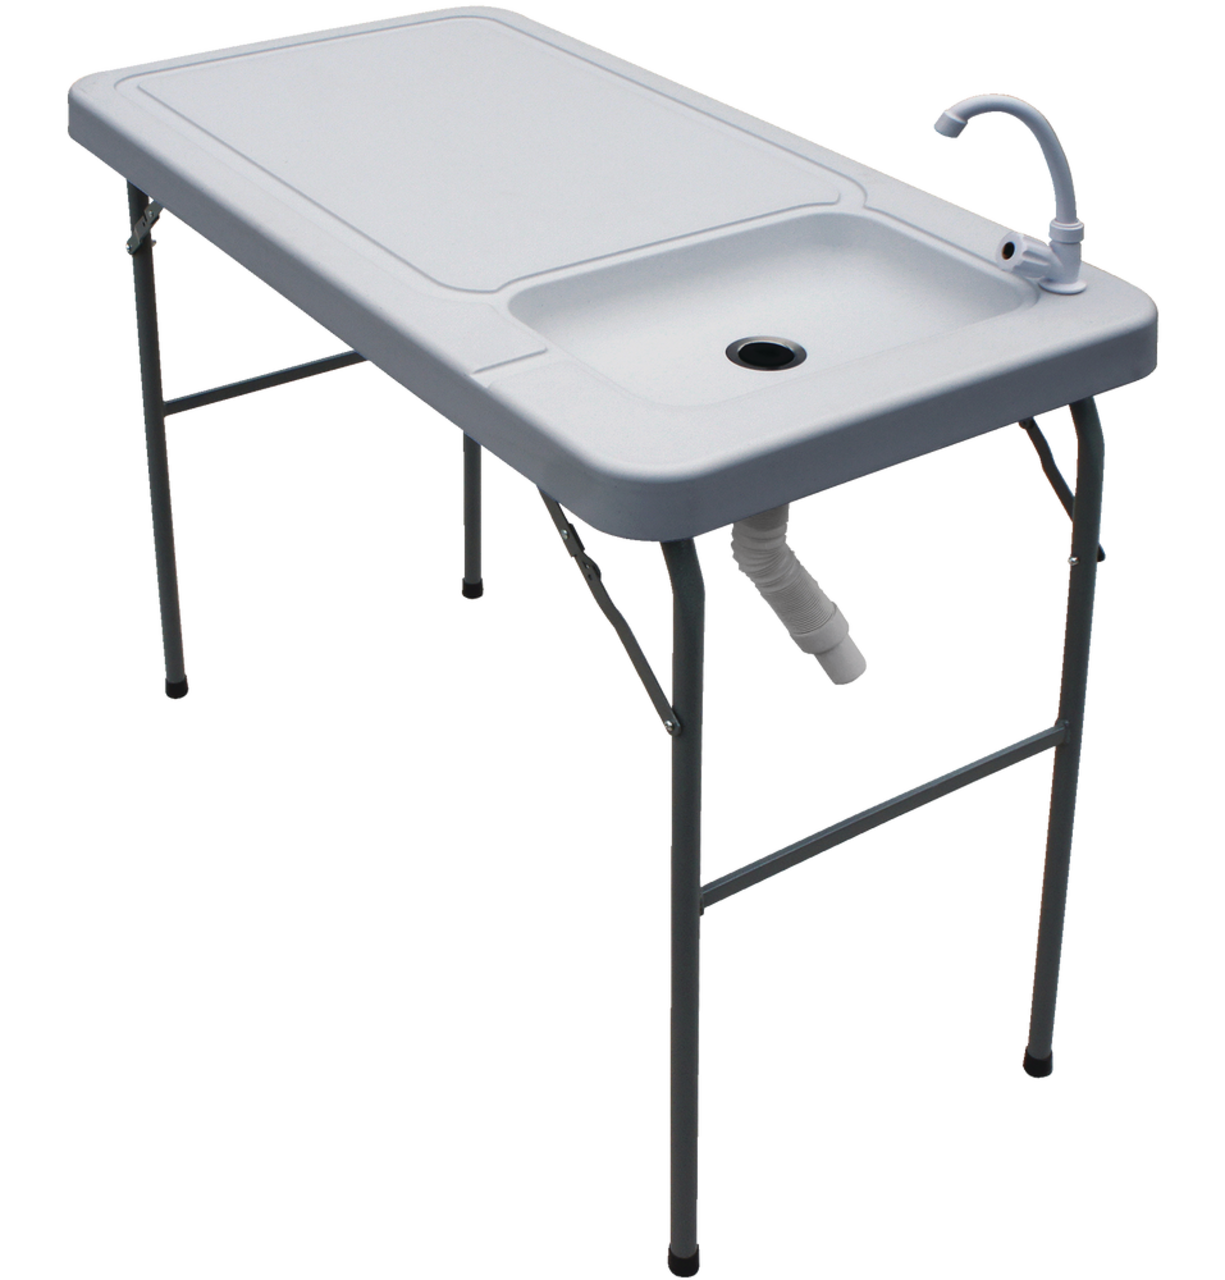 PDG Outdoor Portable Fish & Game Cleaning Table with Built-In Sink & Tap